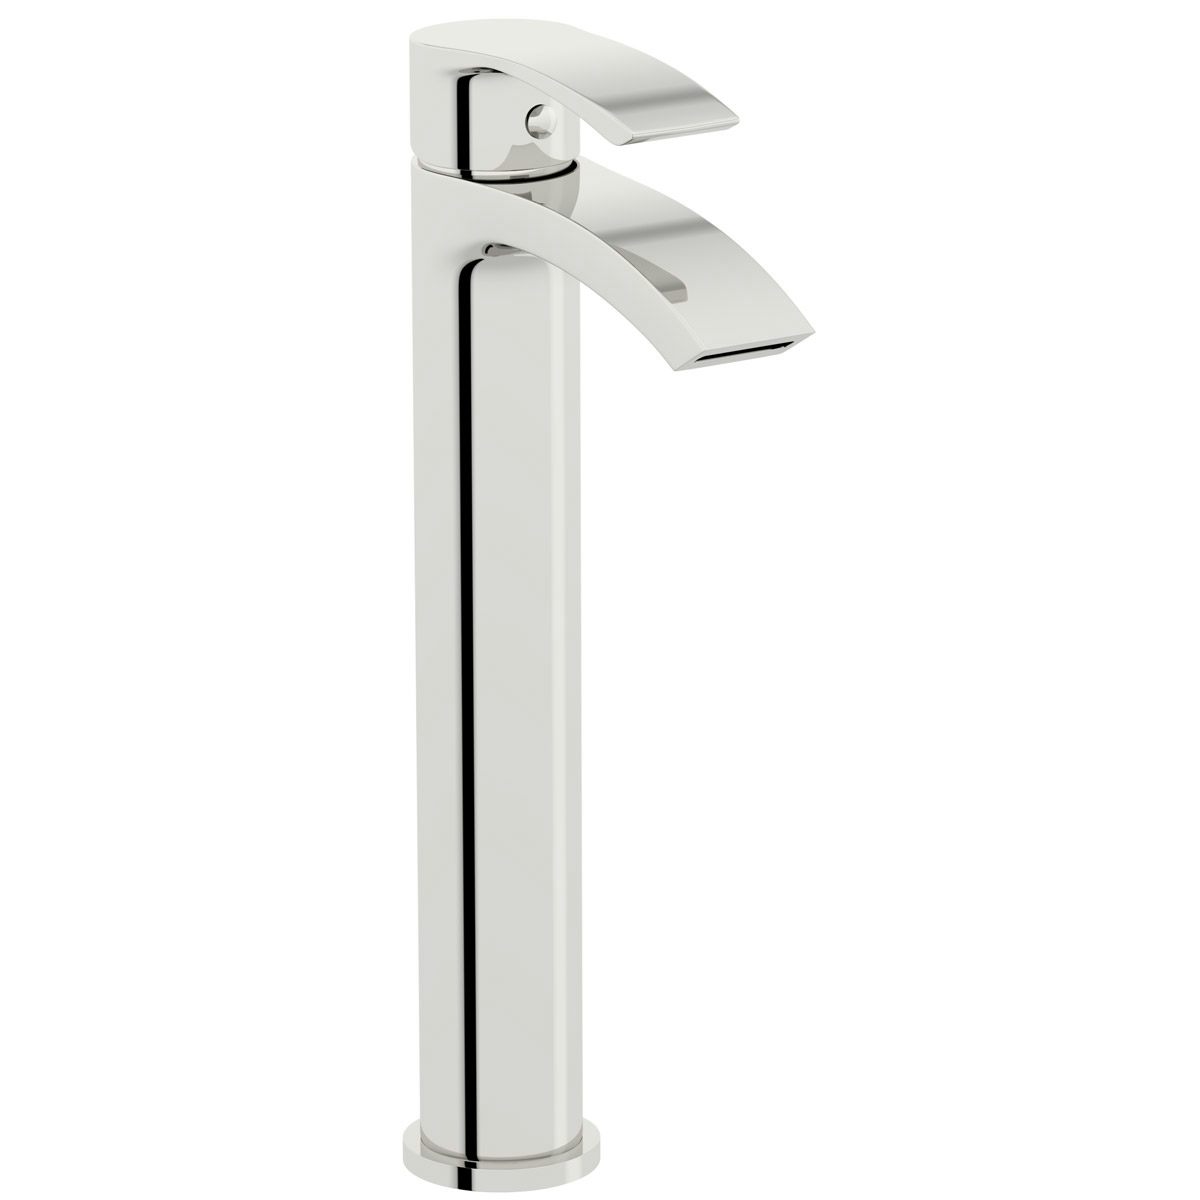 Orchard Wye round high rise basin mixer tap with unslotted waste